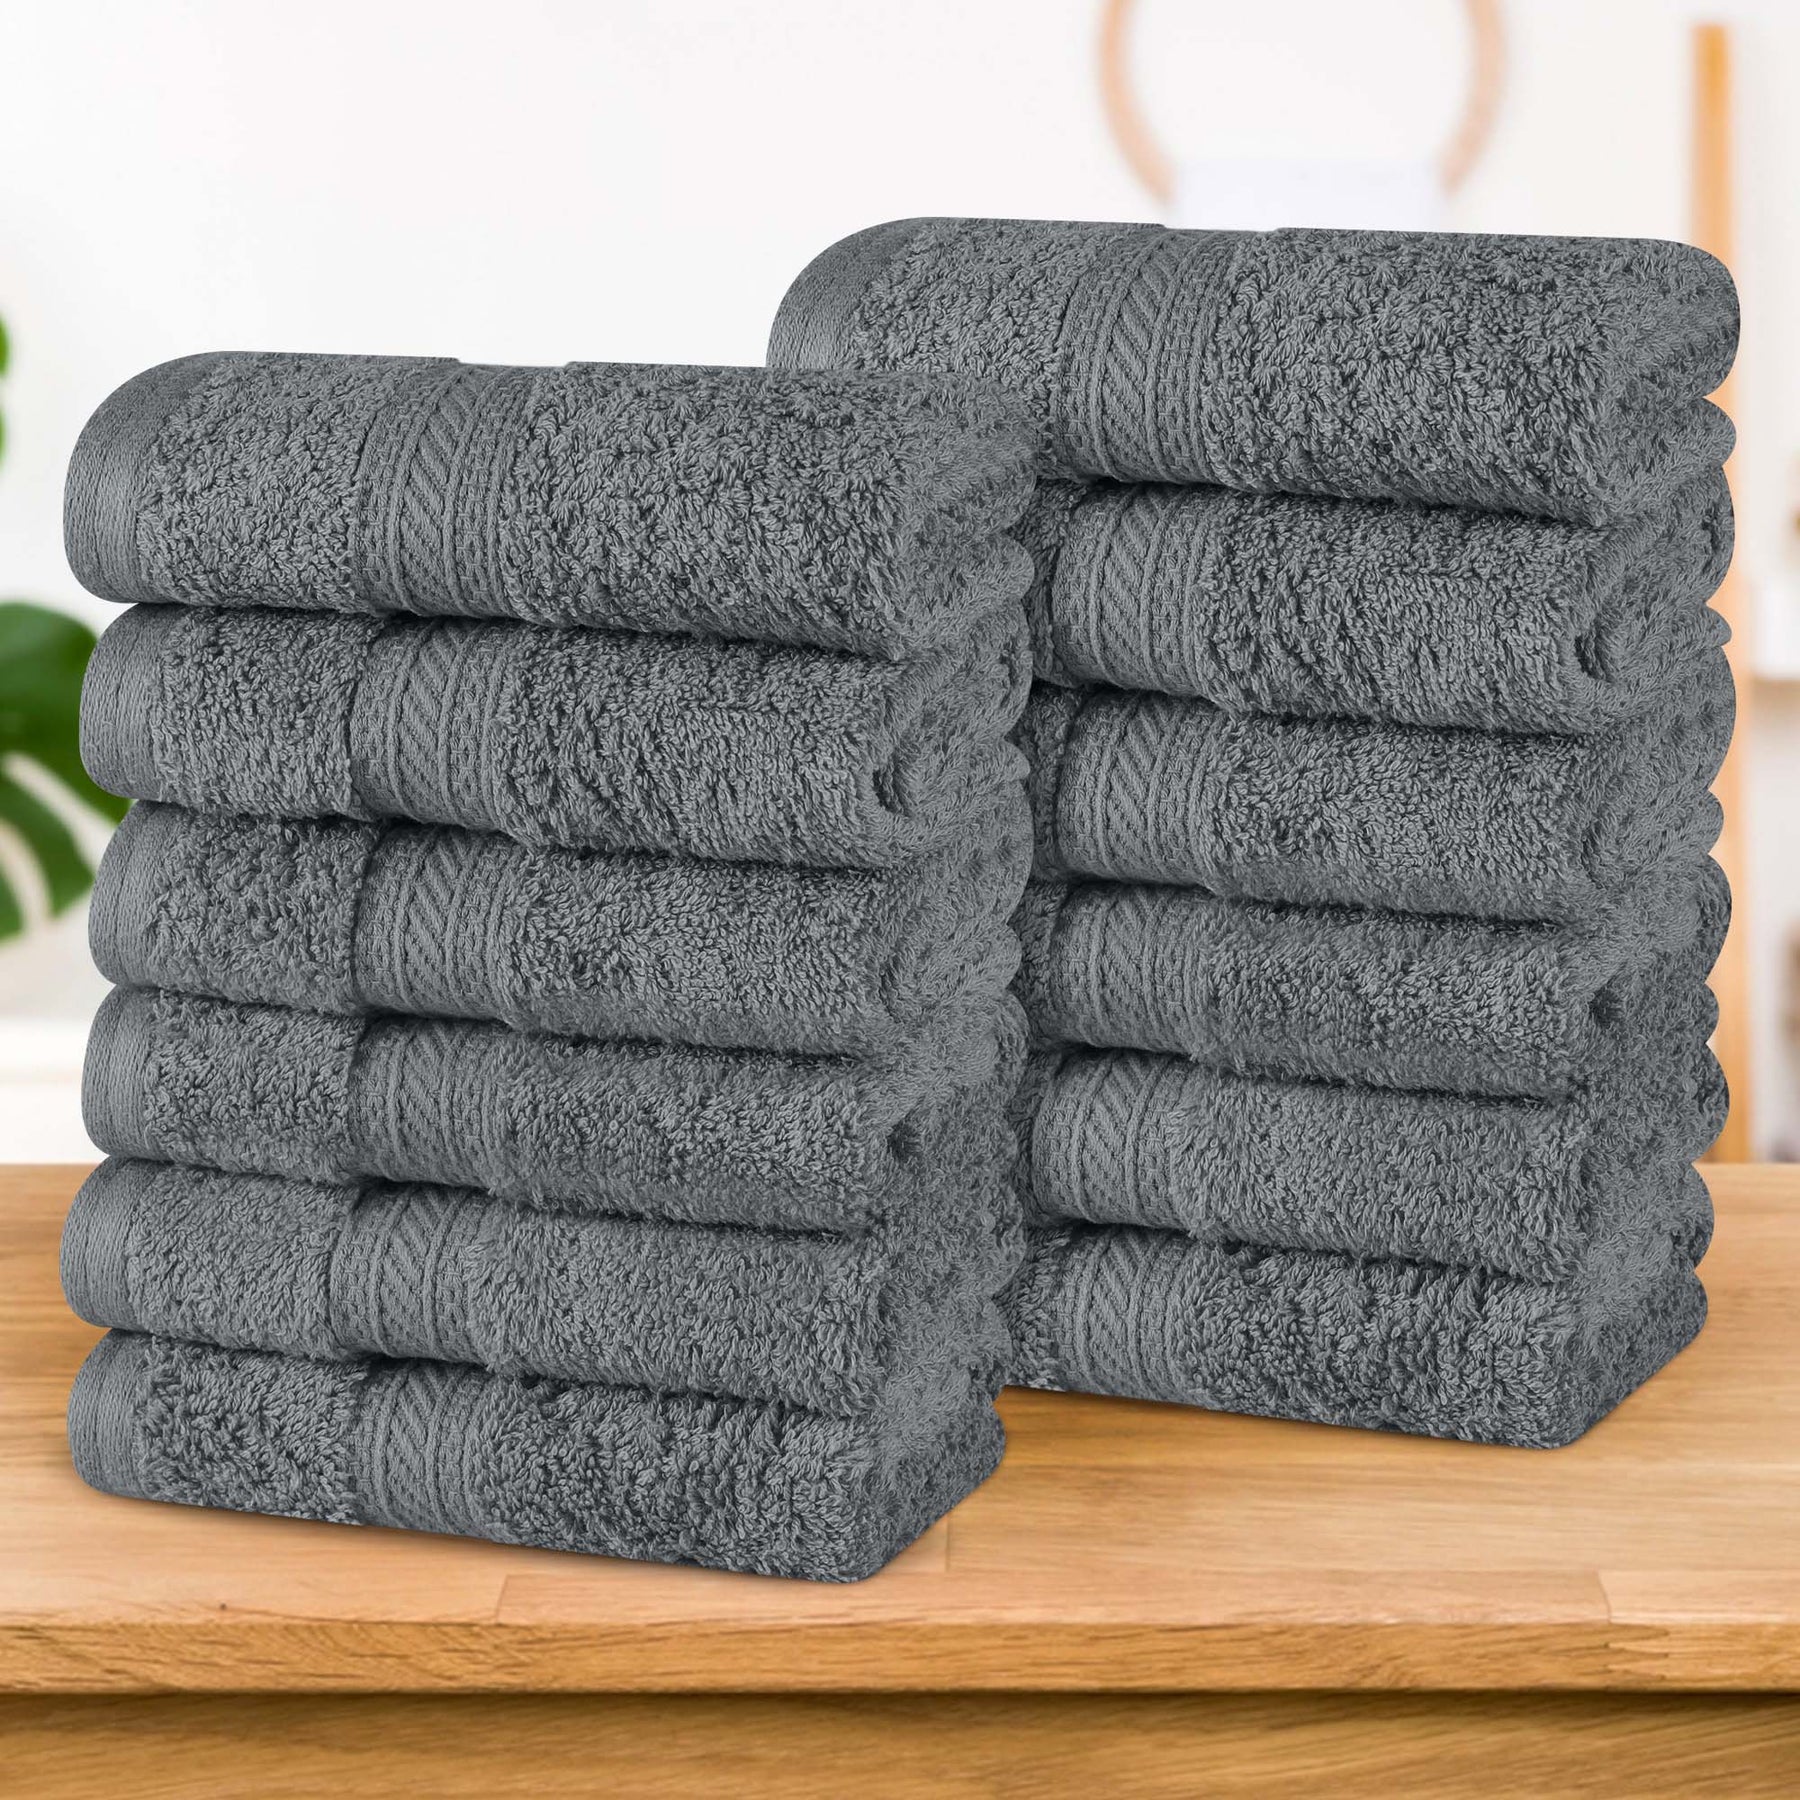 Atlas Combed Cotton Highly Absorbent Solid Face Towels / Washcloths - Grey